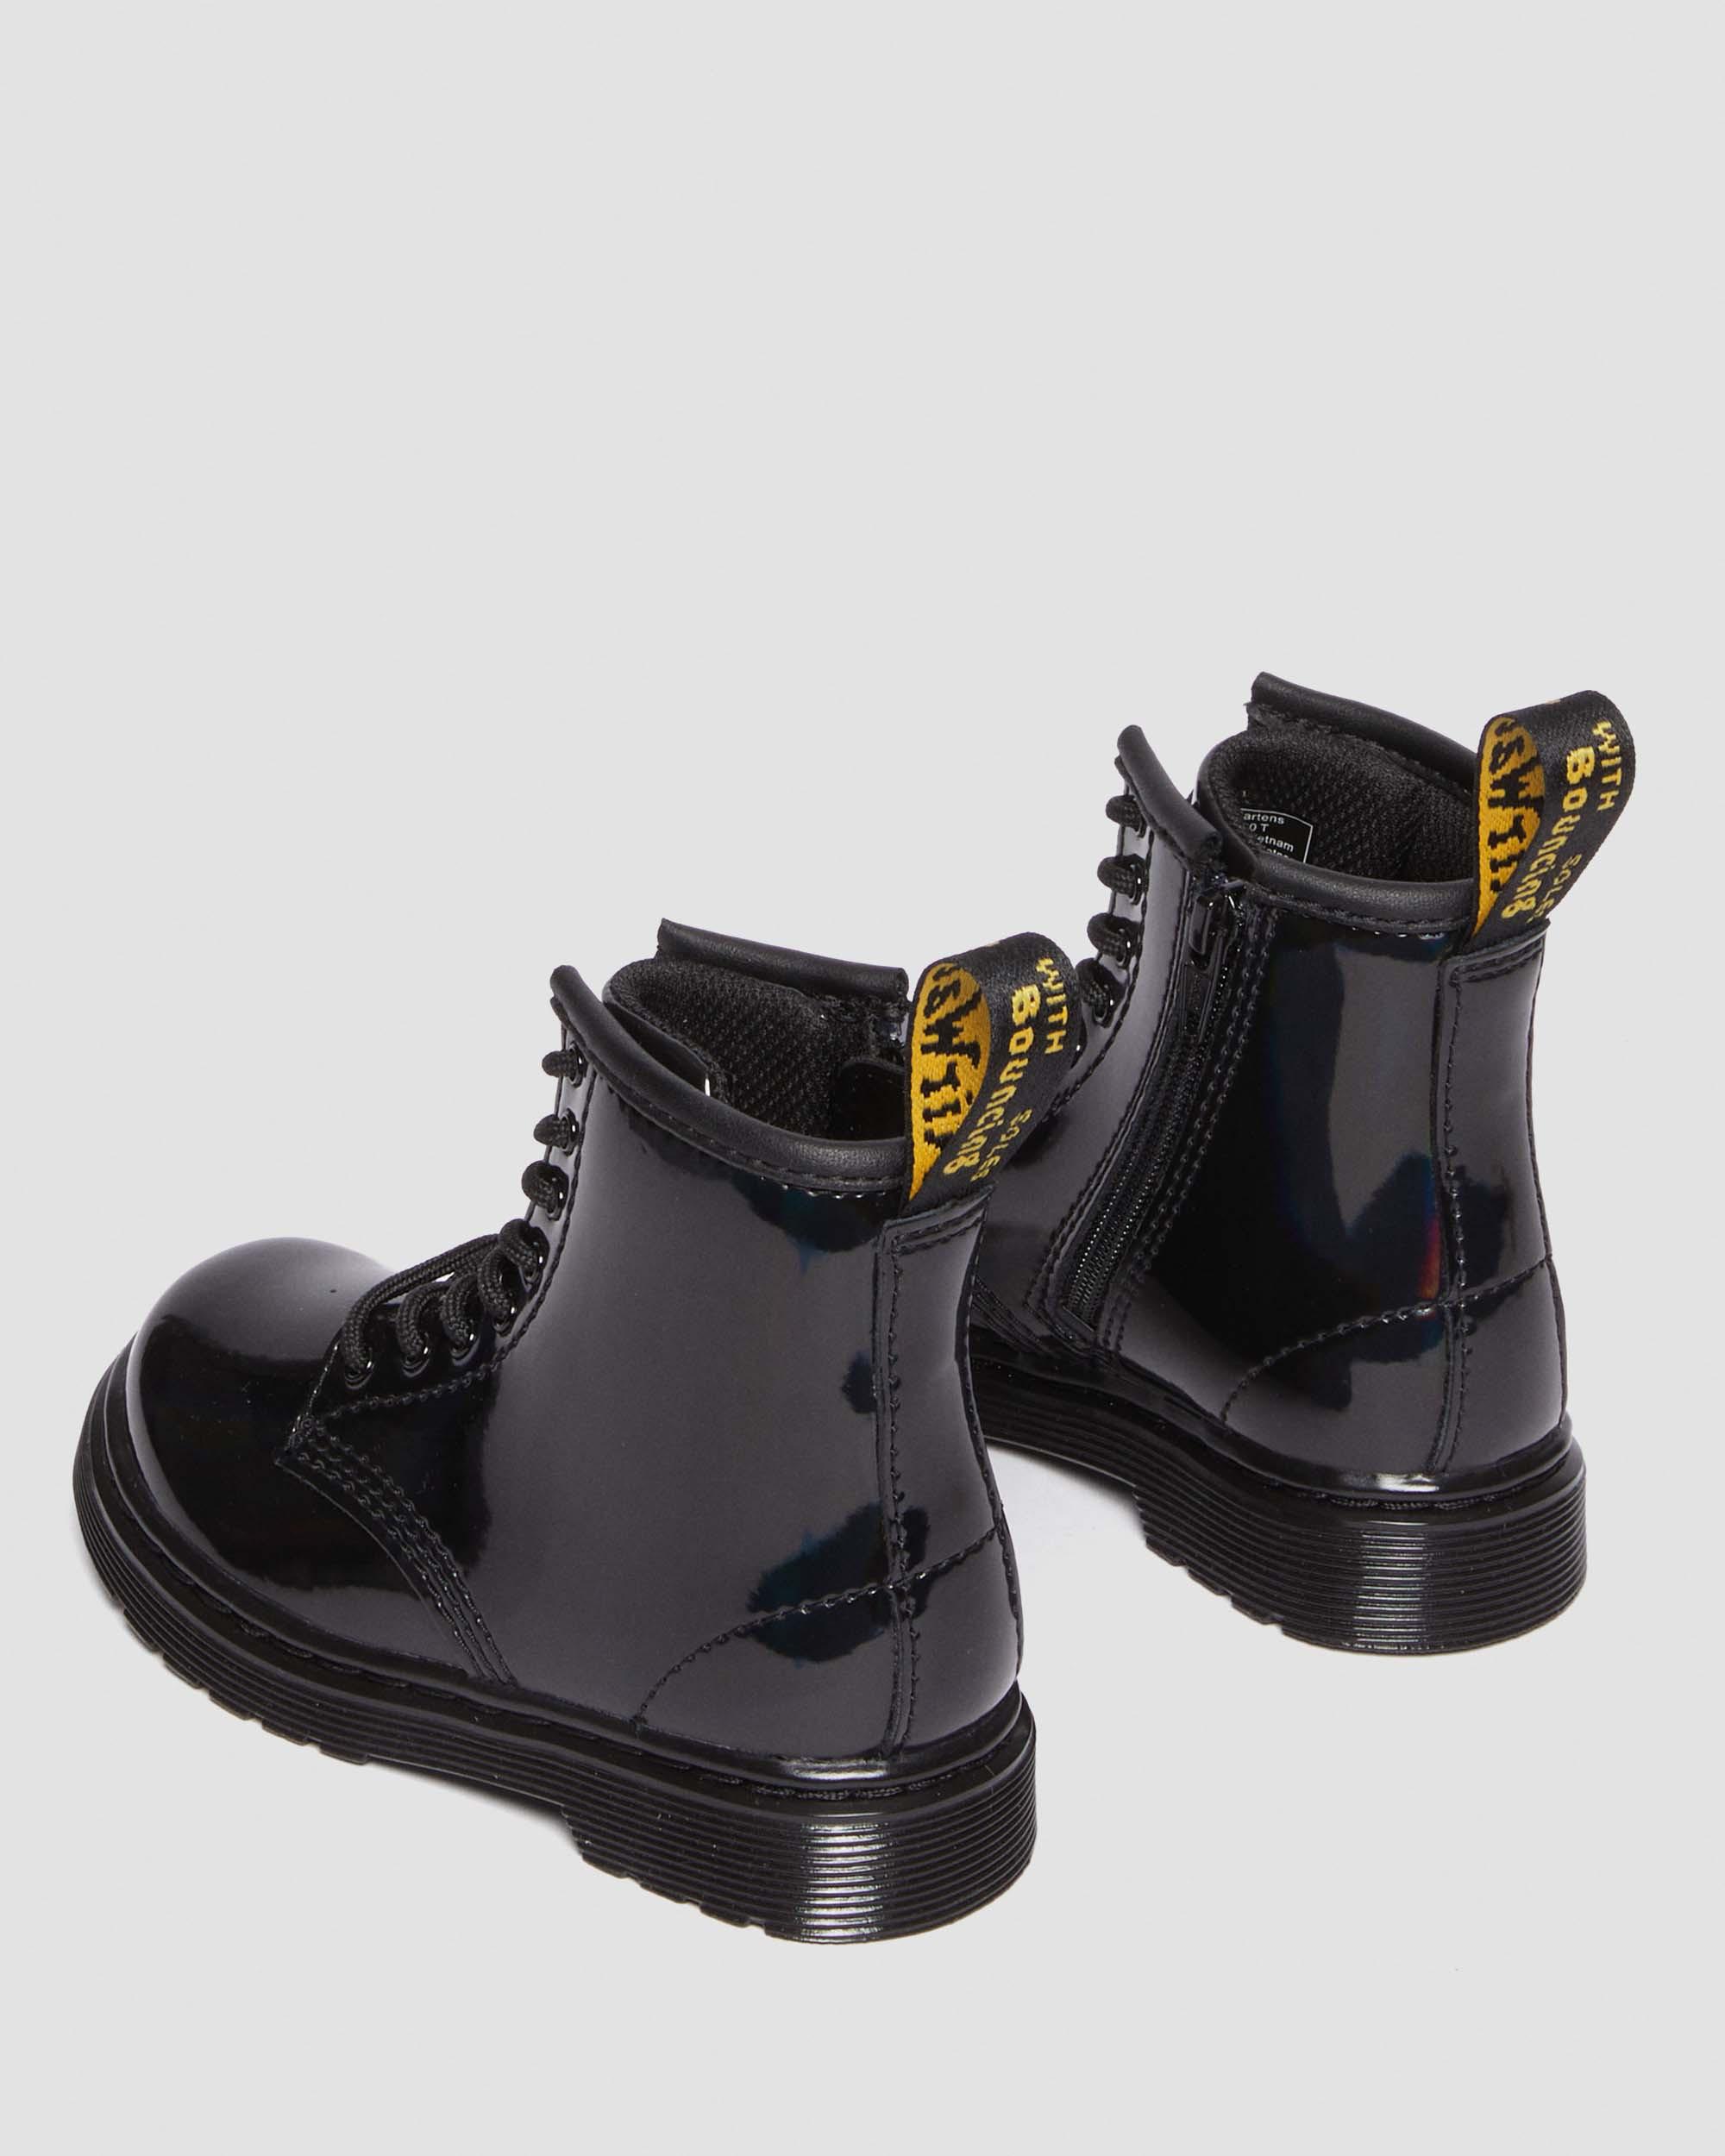 Toddler 1460 Rainbow Leather Lace Up Boots in Black